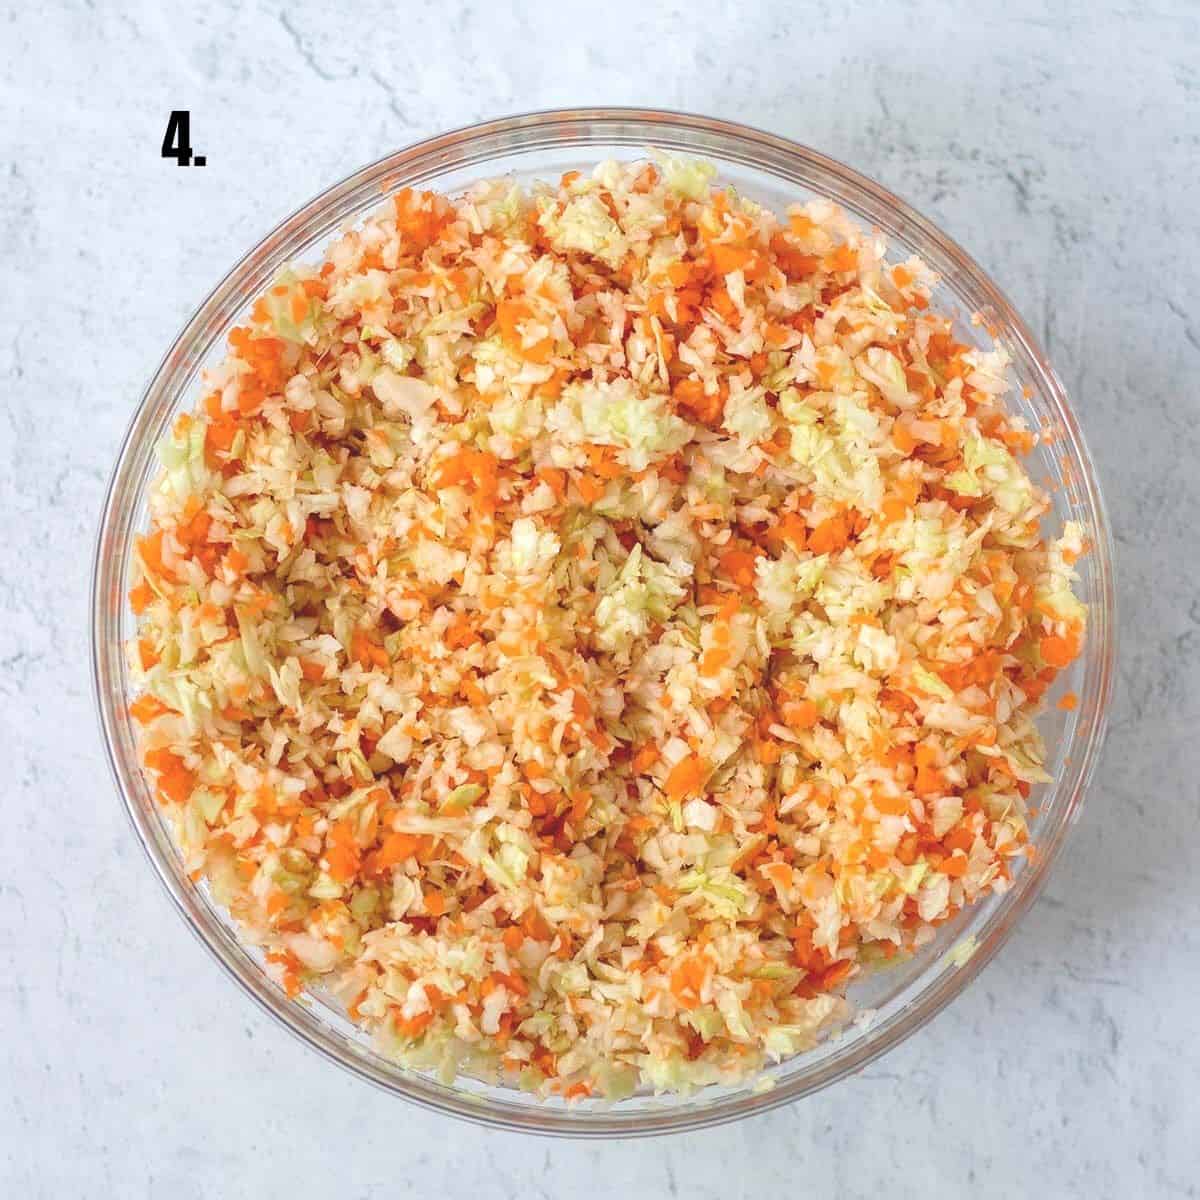 shredded carrots and cabbage mixed together in glass mixing bowl.